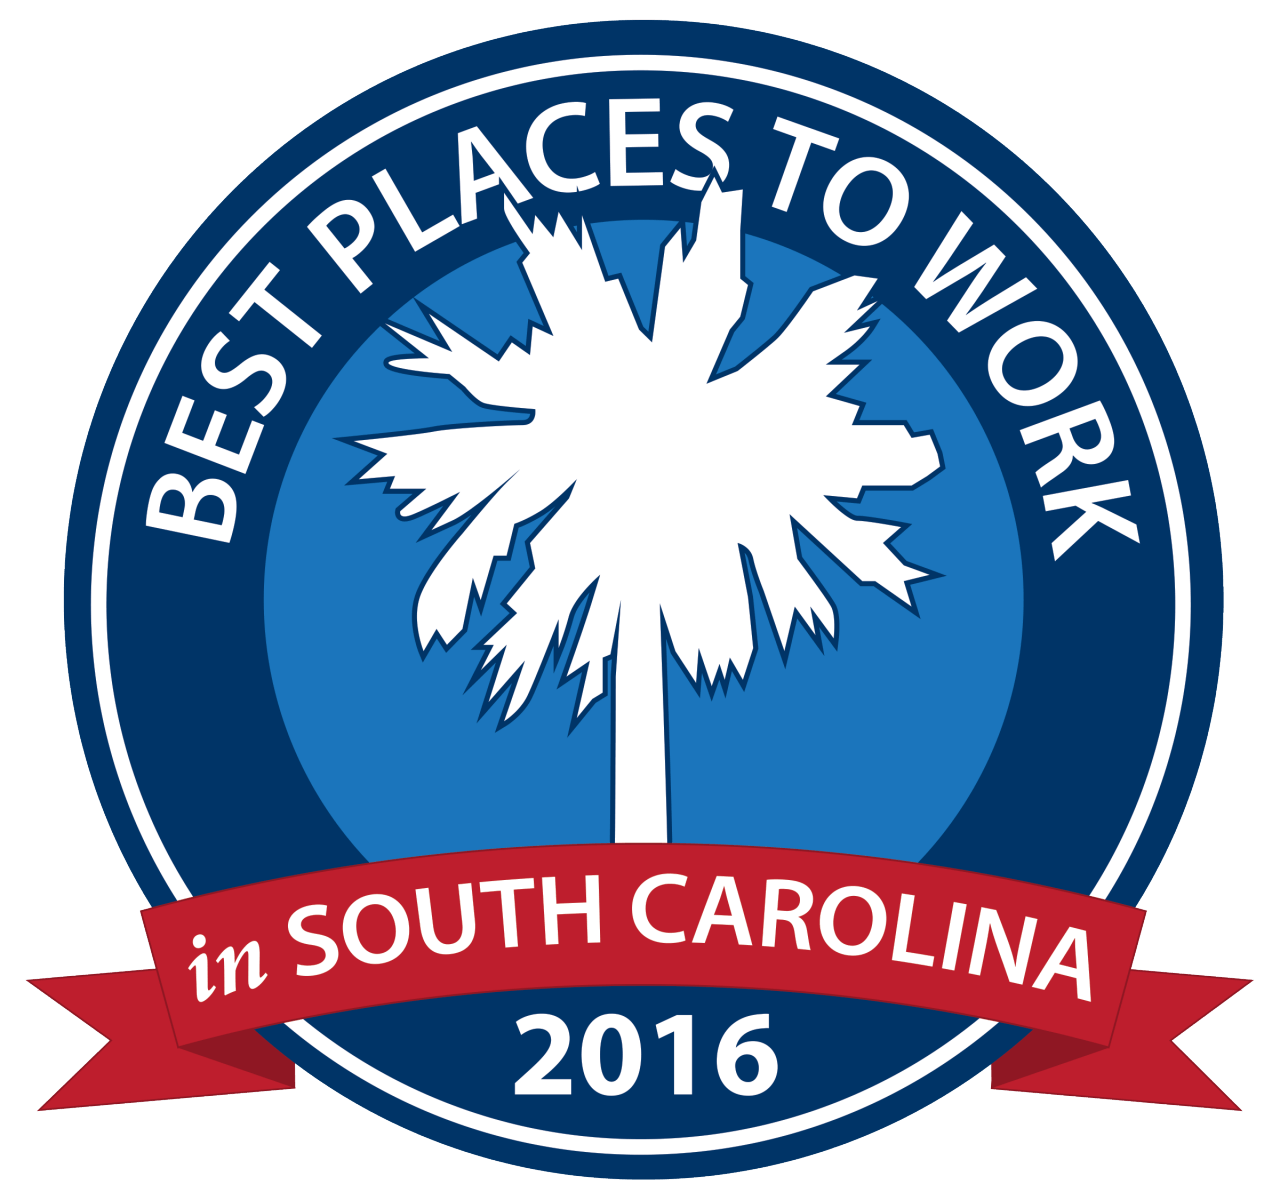 Best Places to Work 2016 in south carolina badge